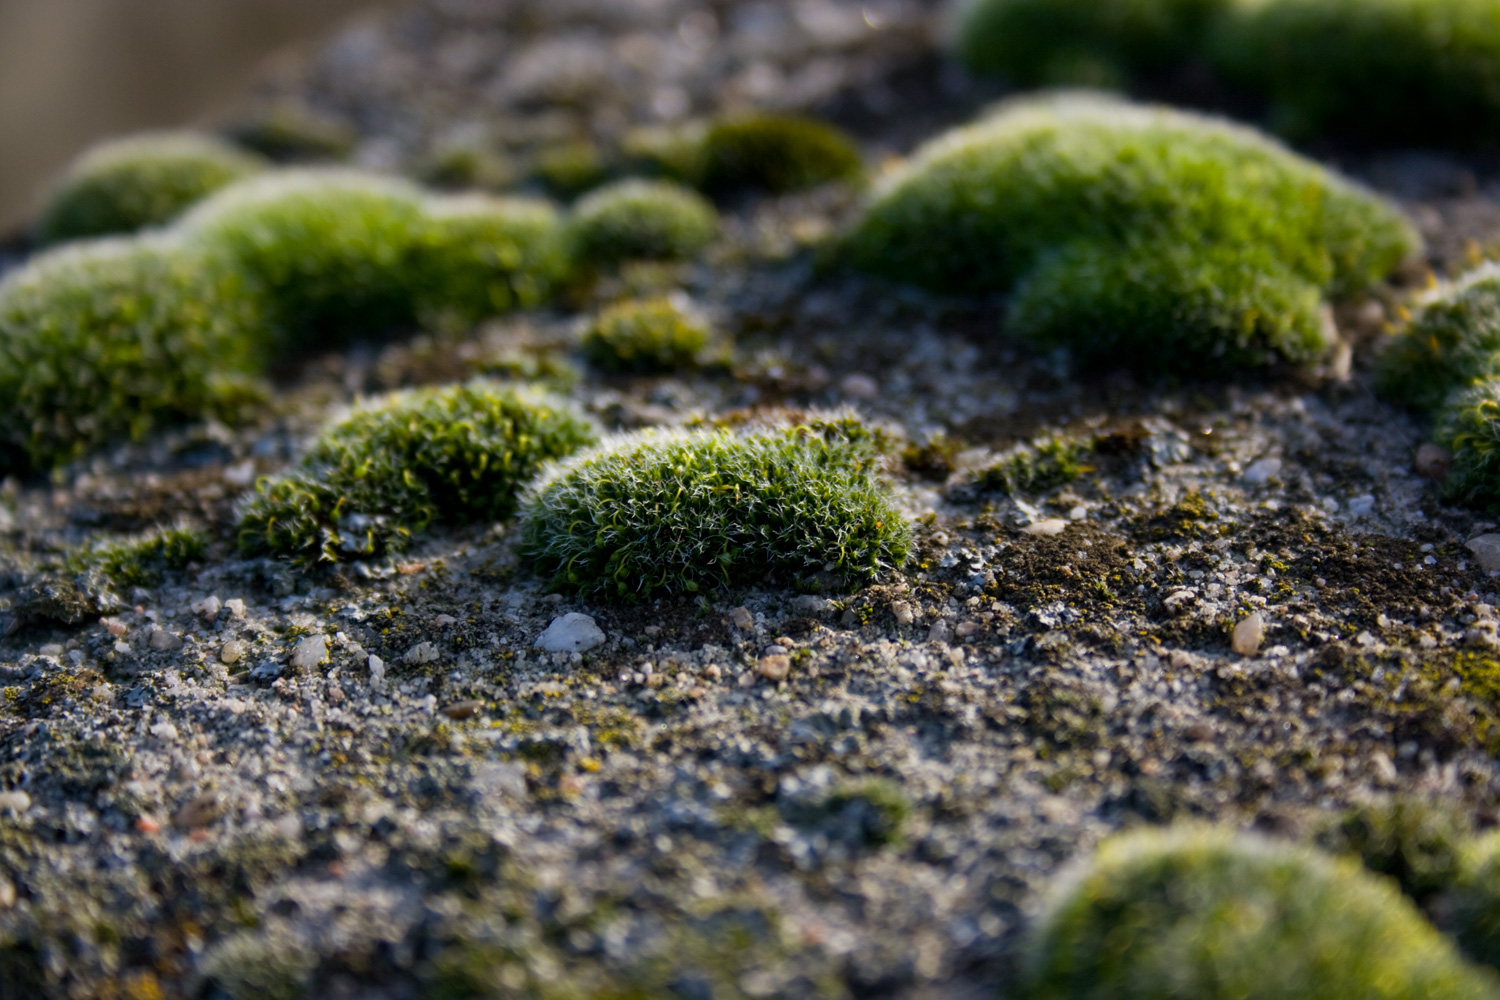 there is some green moss on the ground